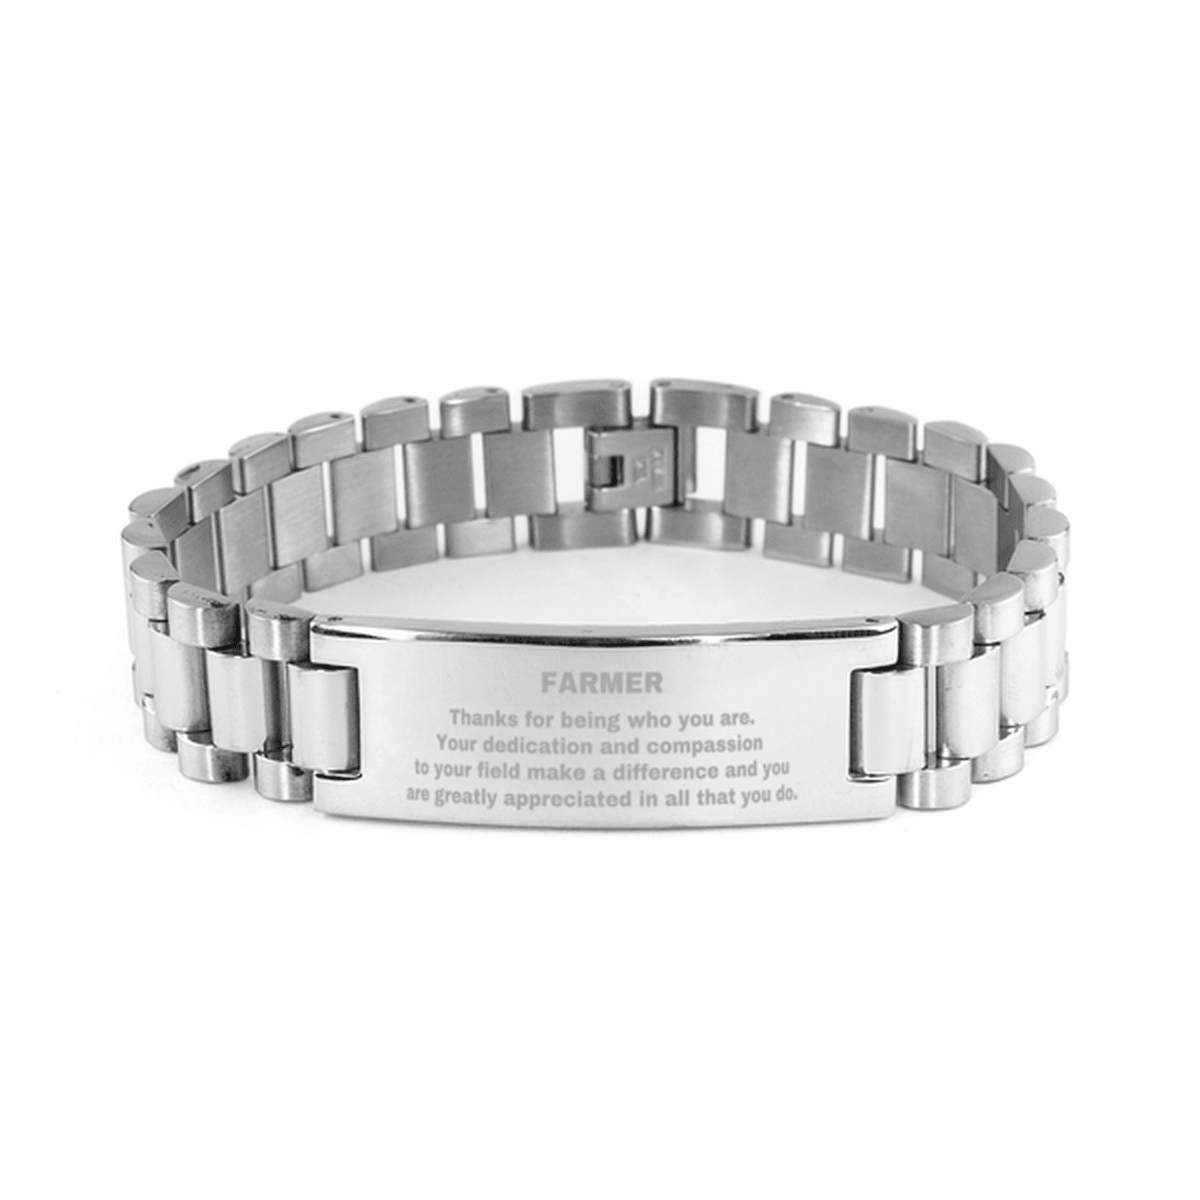 Farmer Ladder Stainless Steel Engraved Bracelet - Thanks for being who you are - Birthday Christmas Jewelry Gifts Coworkers Colleague Boss - Mallard Moon Gift Shop